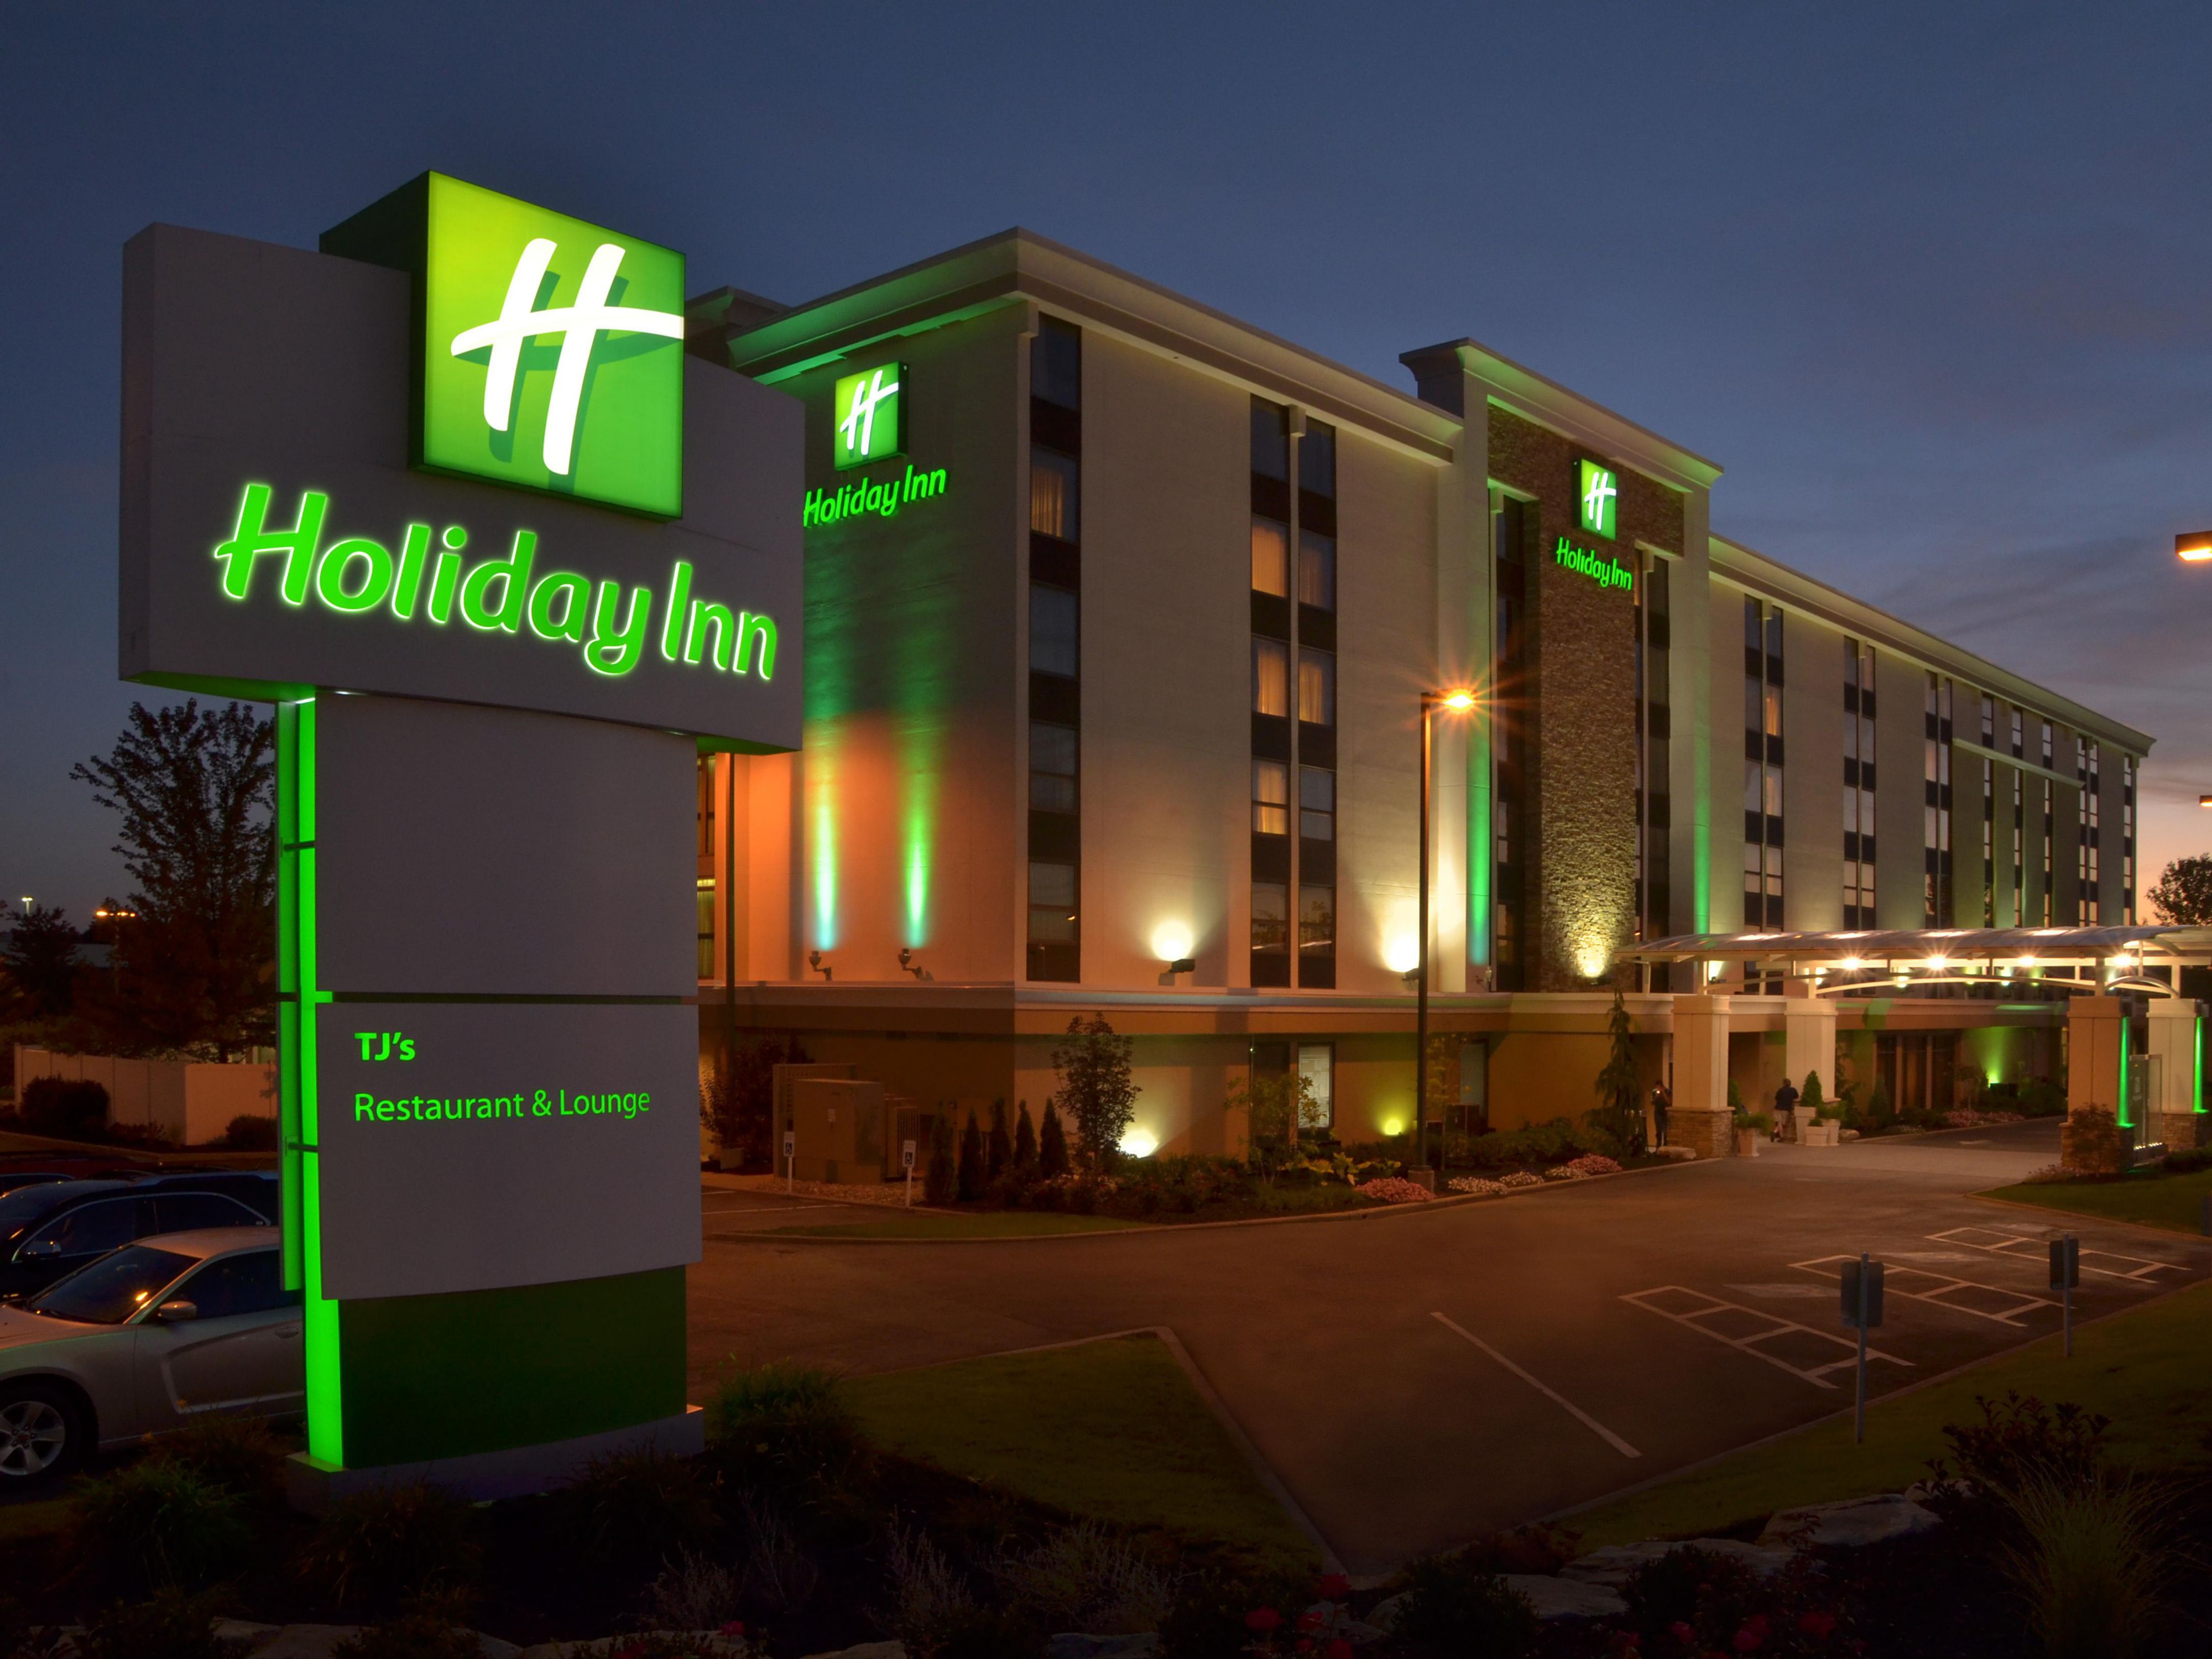 The Holiday Inn Youngstown South has ample parking for semis!  So come enjoy a relaxing evening with us and take a break from the road!